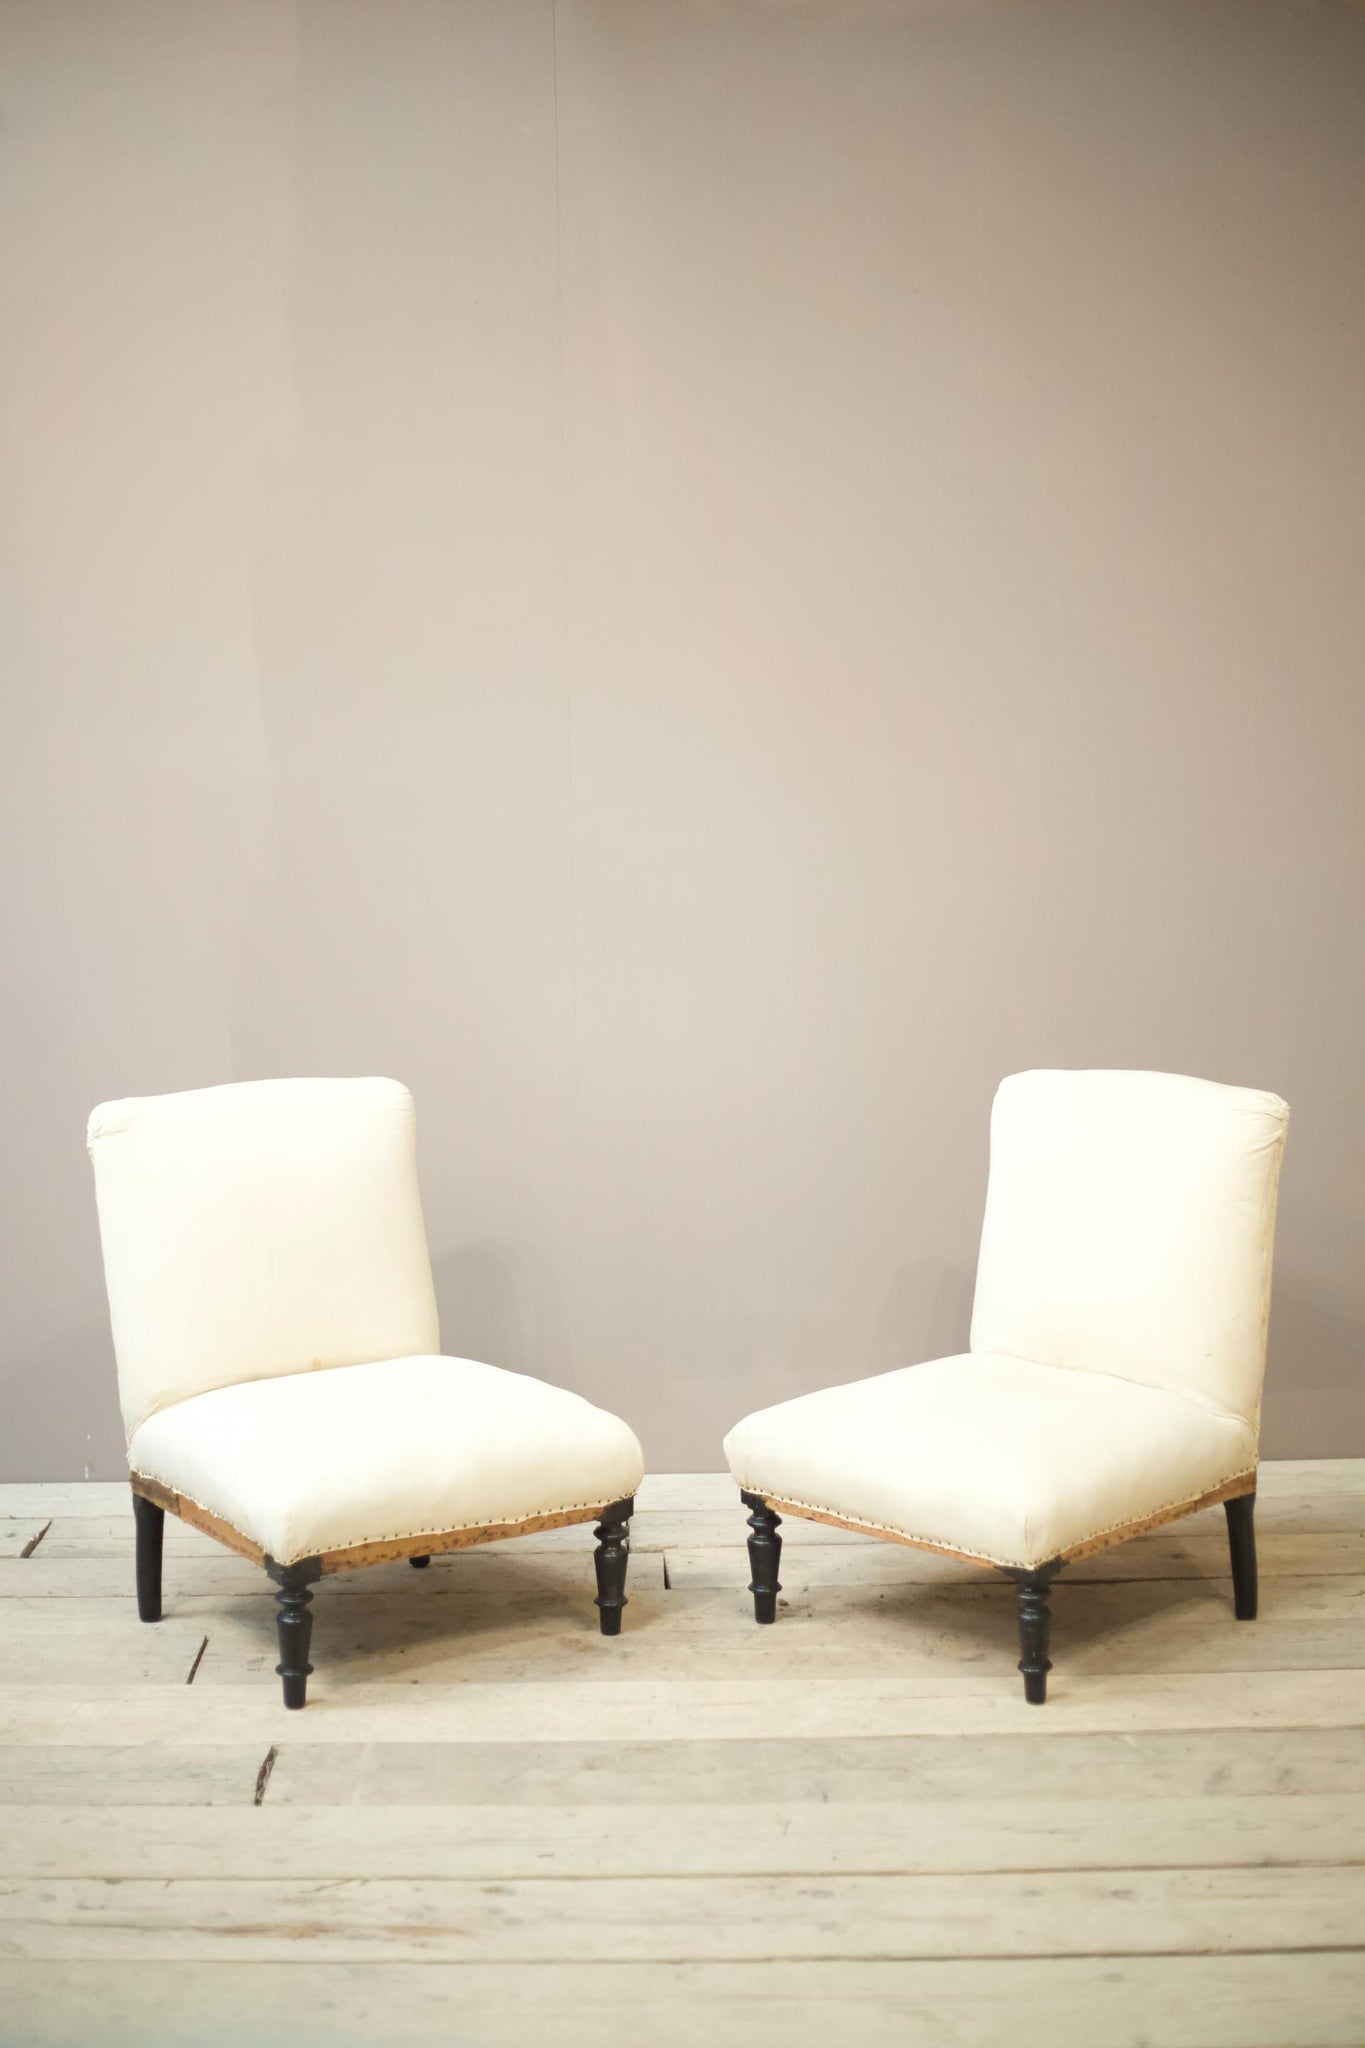 Pair of Napoleon III cushion backed side chairs